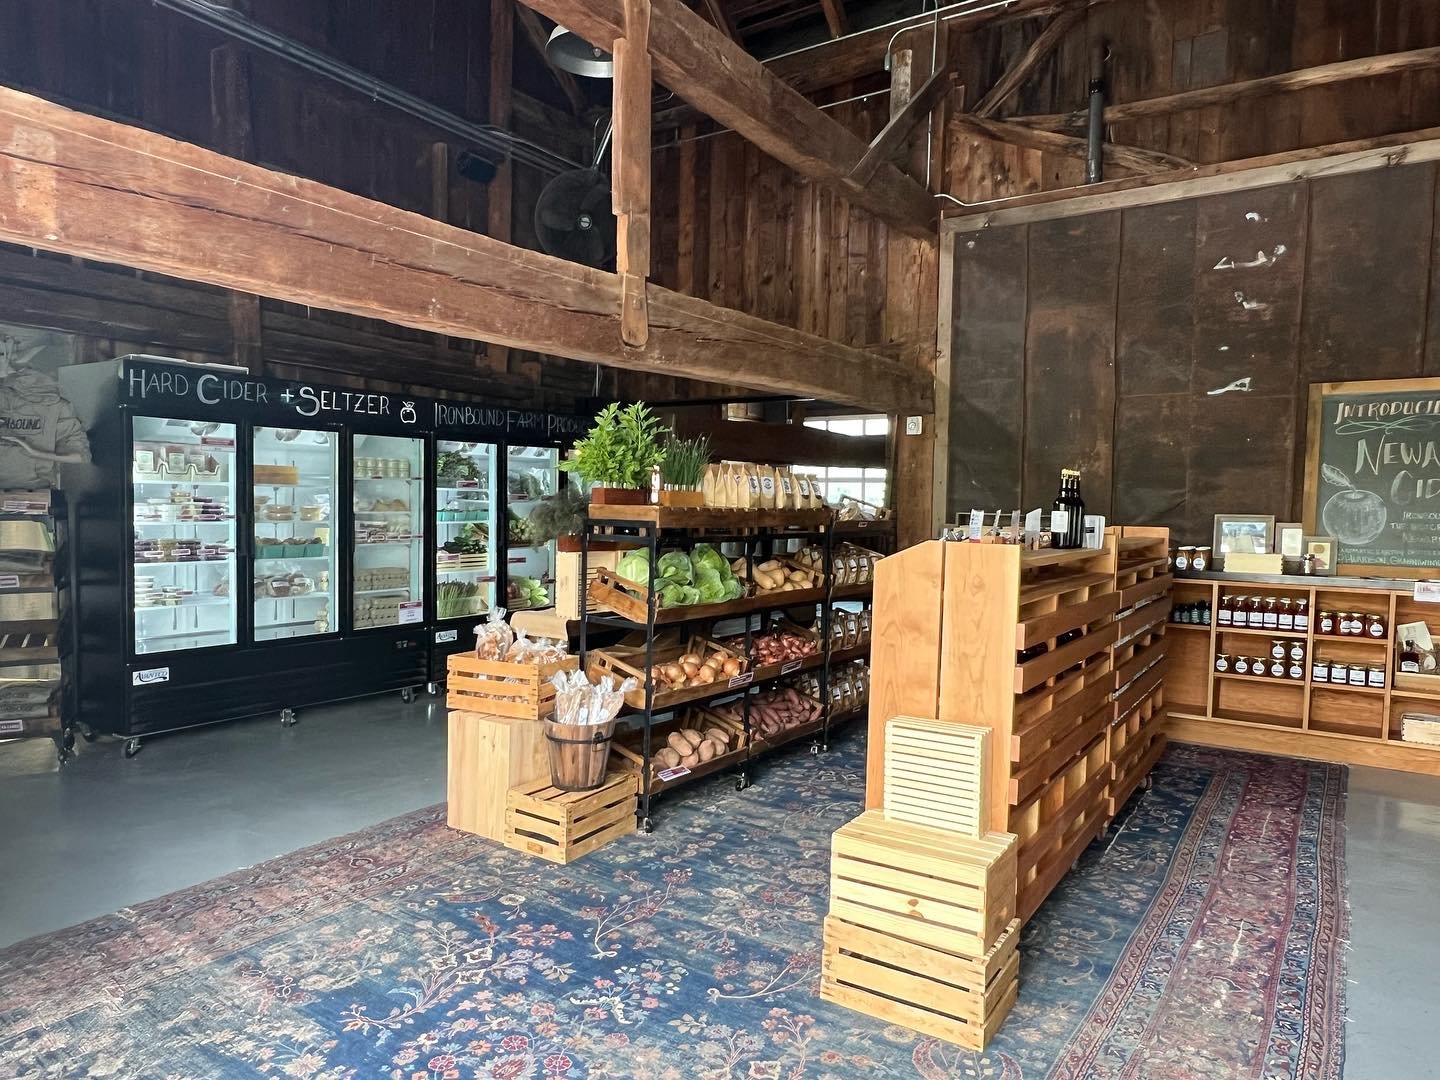 The Farm Store keeps getting better and better! We&rsquo;ve got a brand new layout just in time for the bountiful spring and summer harvest. Come explore the new look this weekend! 

Farm Store Hours:
Wednesday: 10AM - 5 PM
Thursday - Sunday: 10AM - 